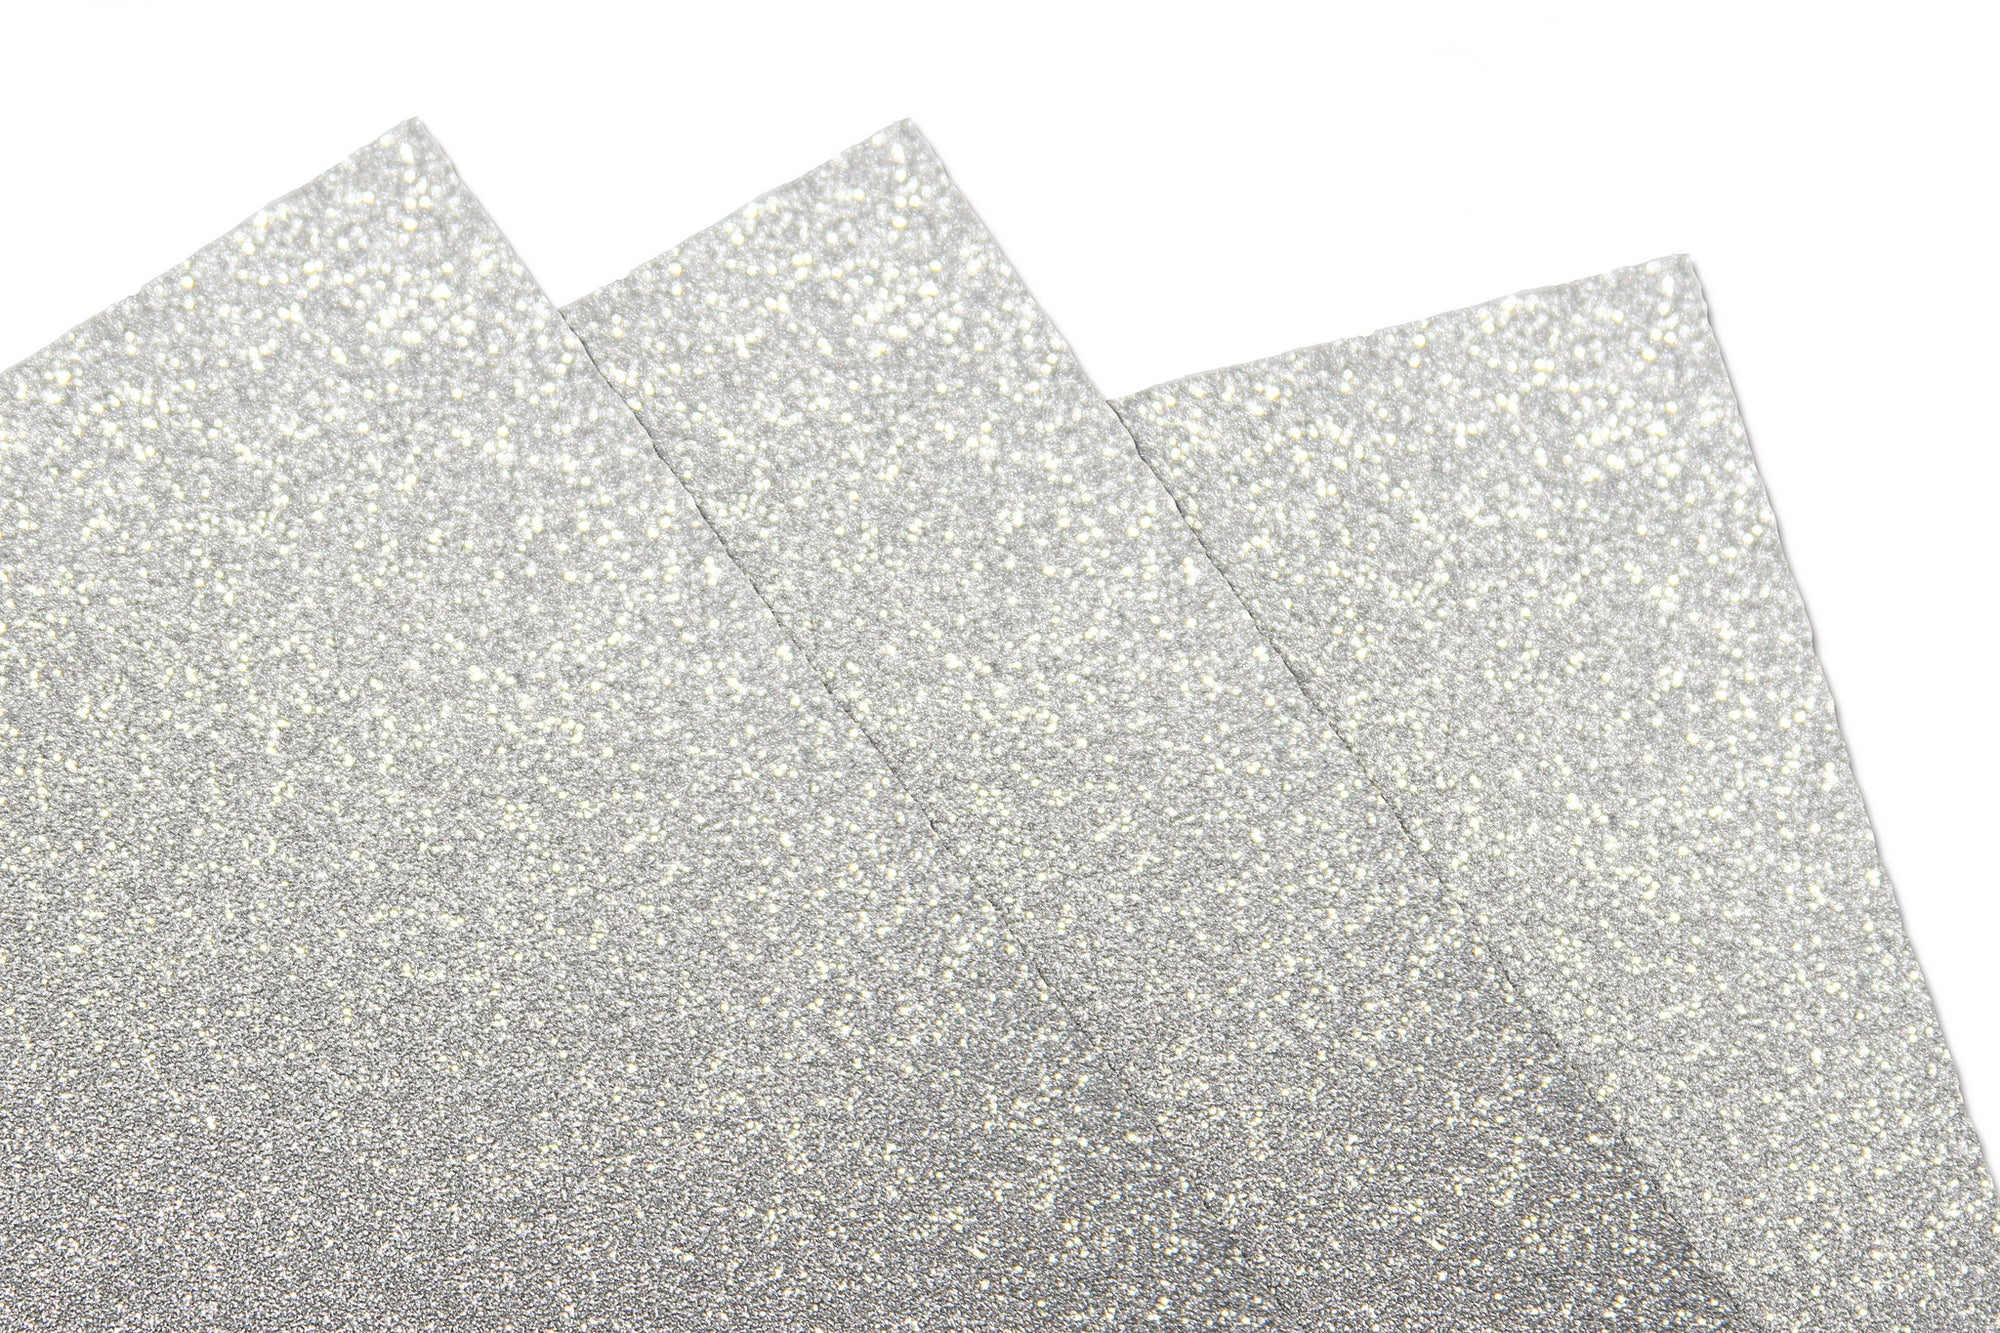 Chunky Silver Glitter Paper Sheets for Crafts (11 x 8.75 in, 30